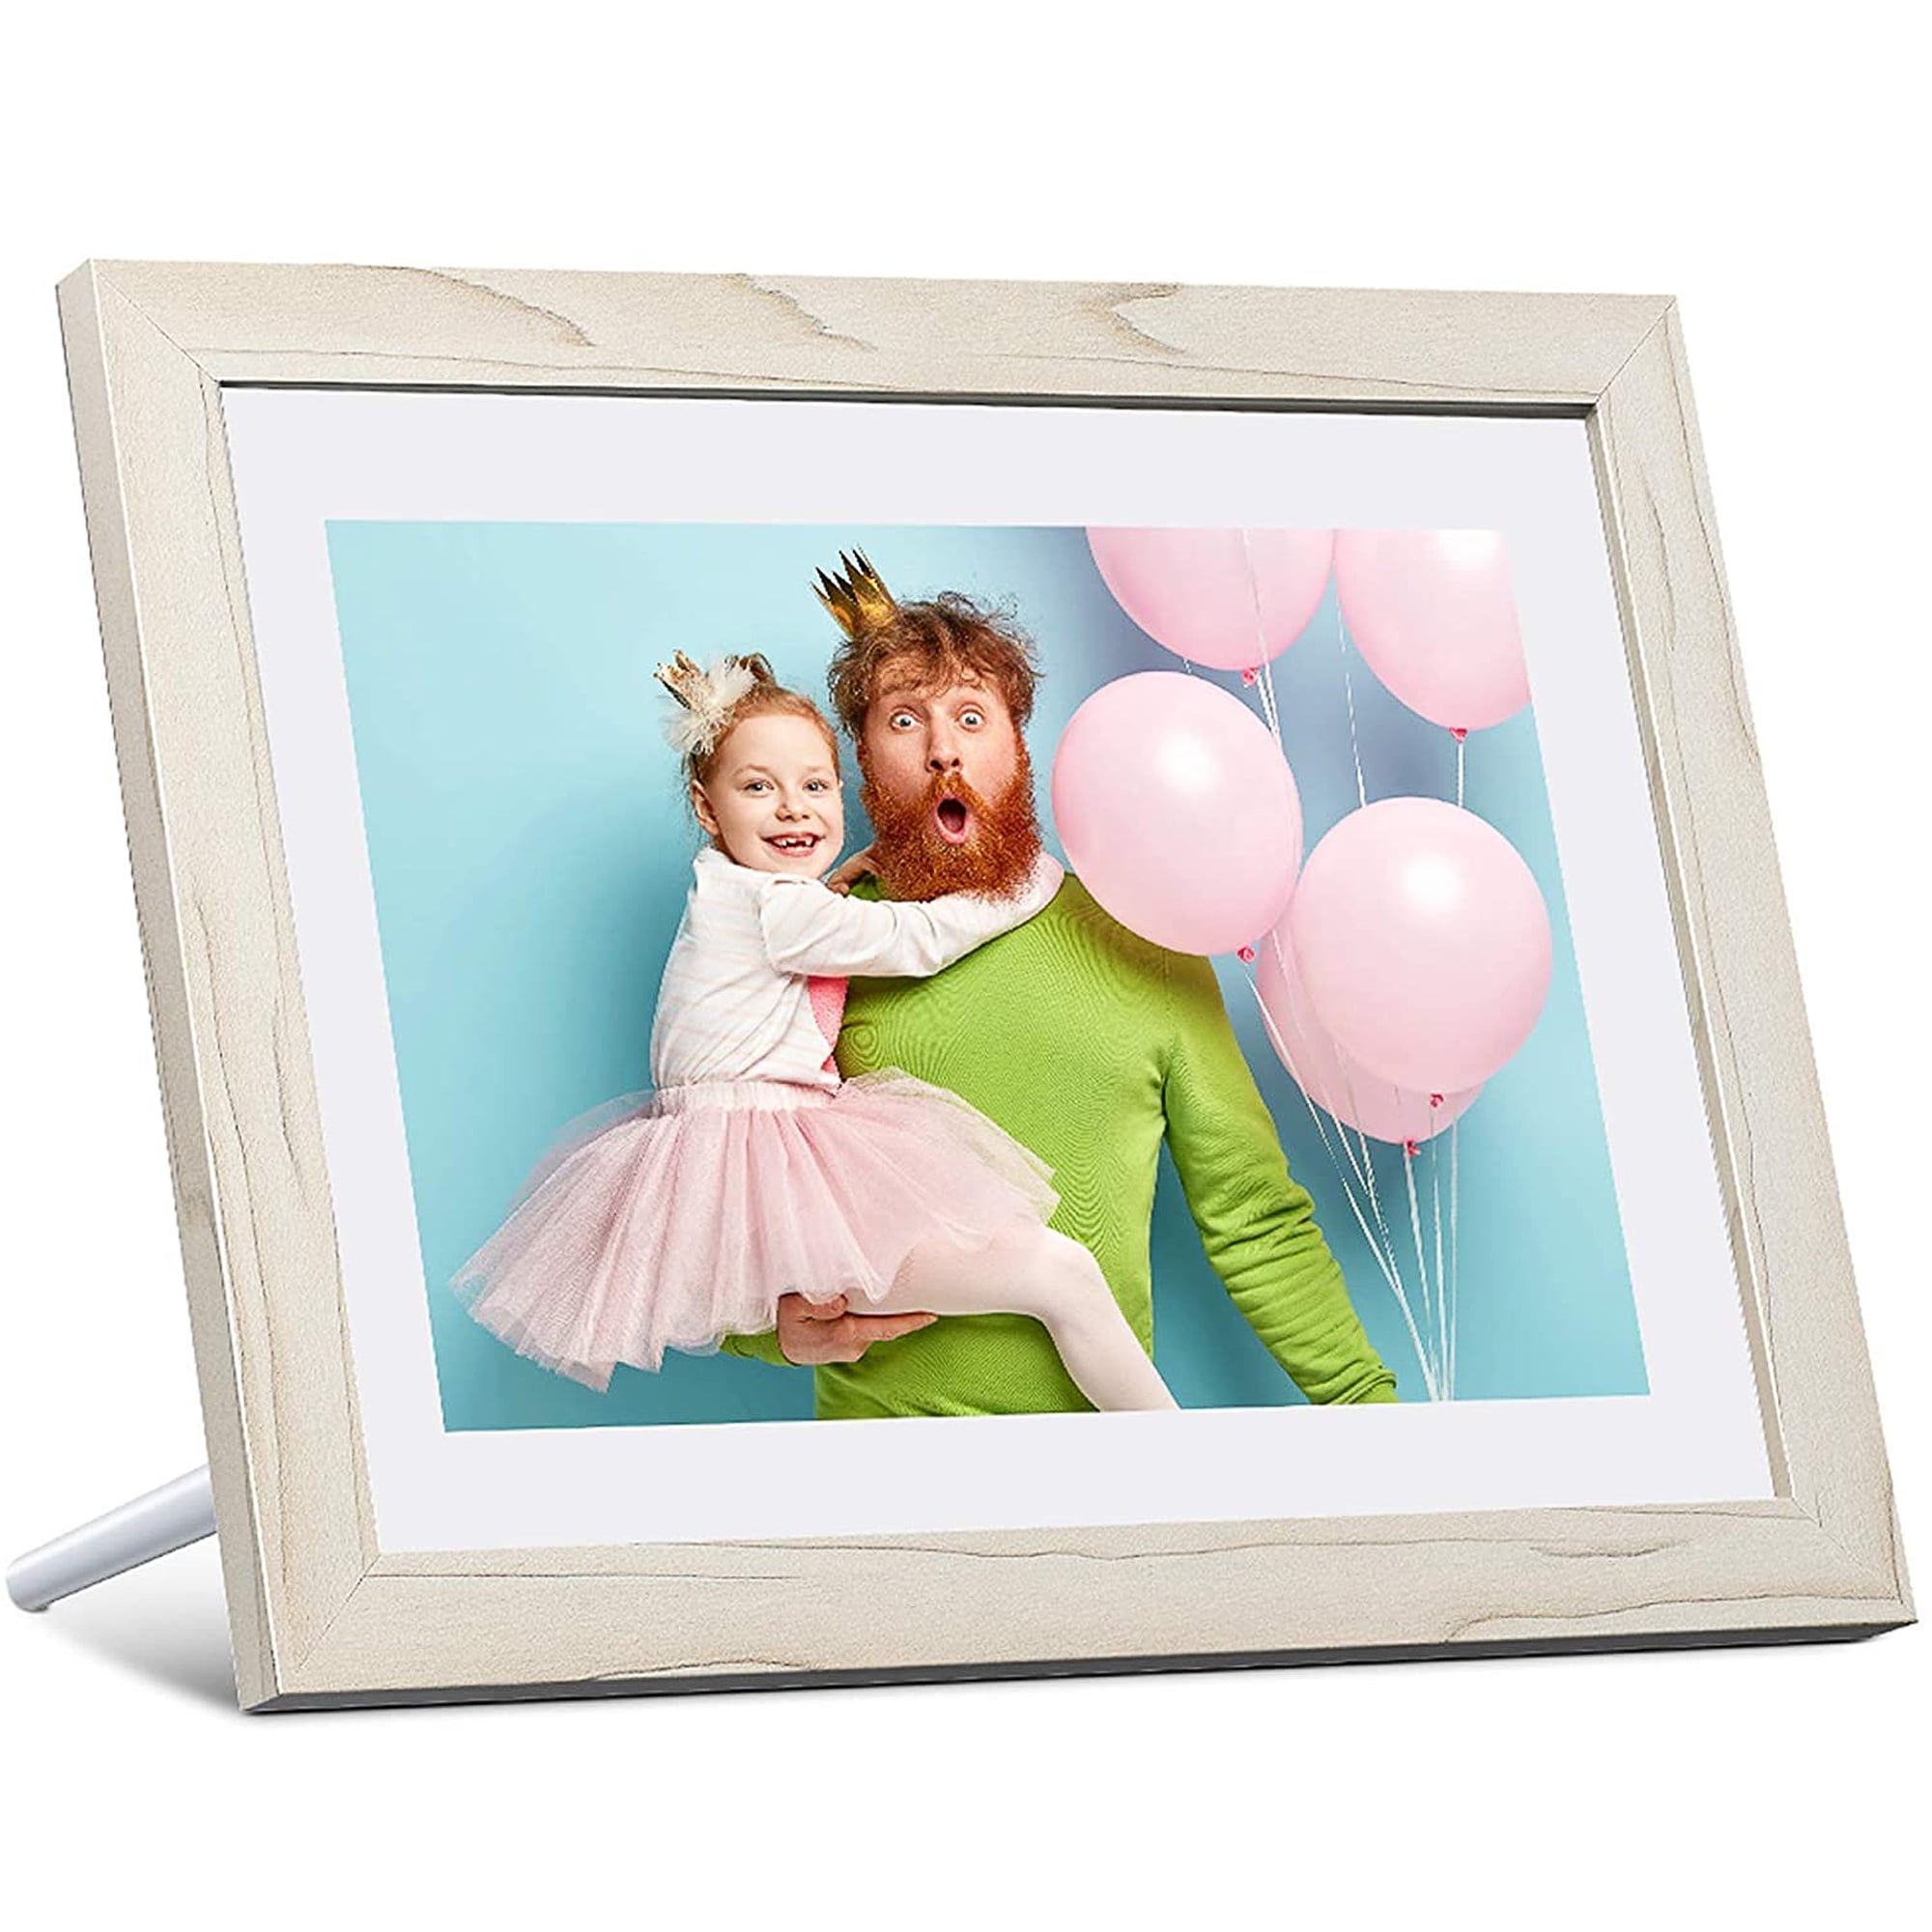 Feelcare 16GB 5ghz Wifi Digital Picture Frame 10 inch, IPS FHD 